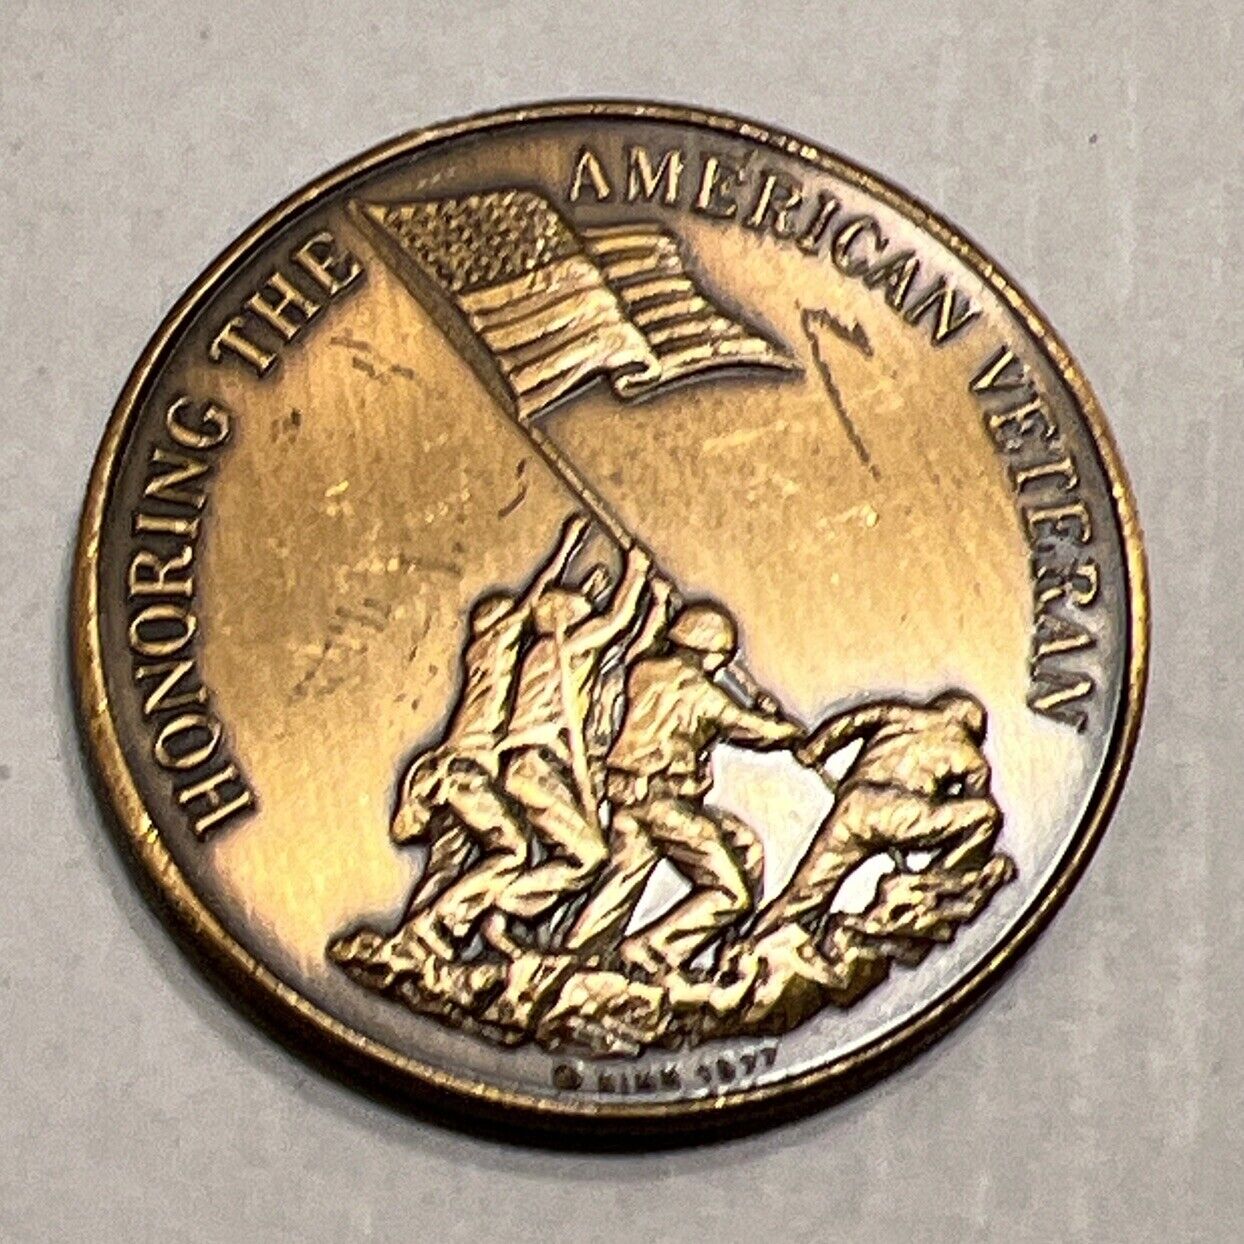 US Military Challenge Coin - Honoring the American Veteran